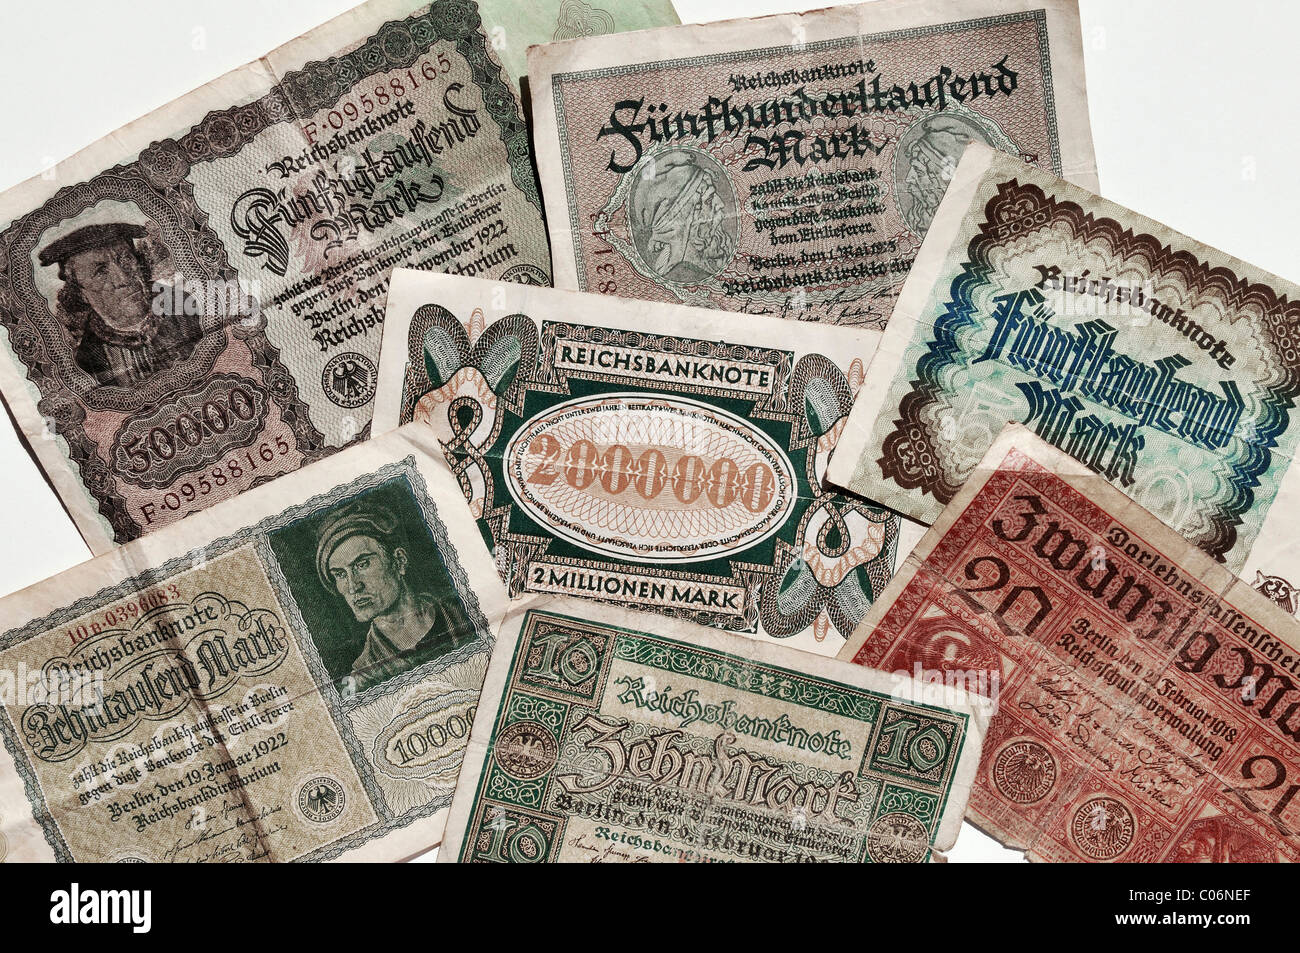 German Reichsmark banknotes, 1918-1923, Germany, Europe Stock Photo